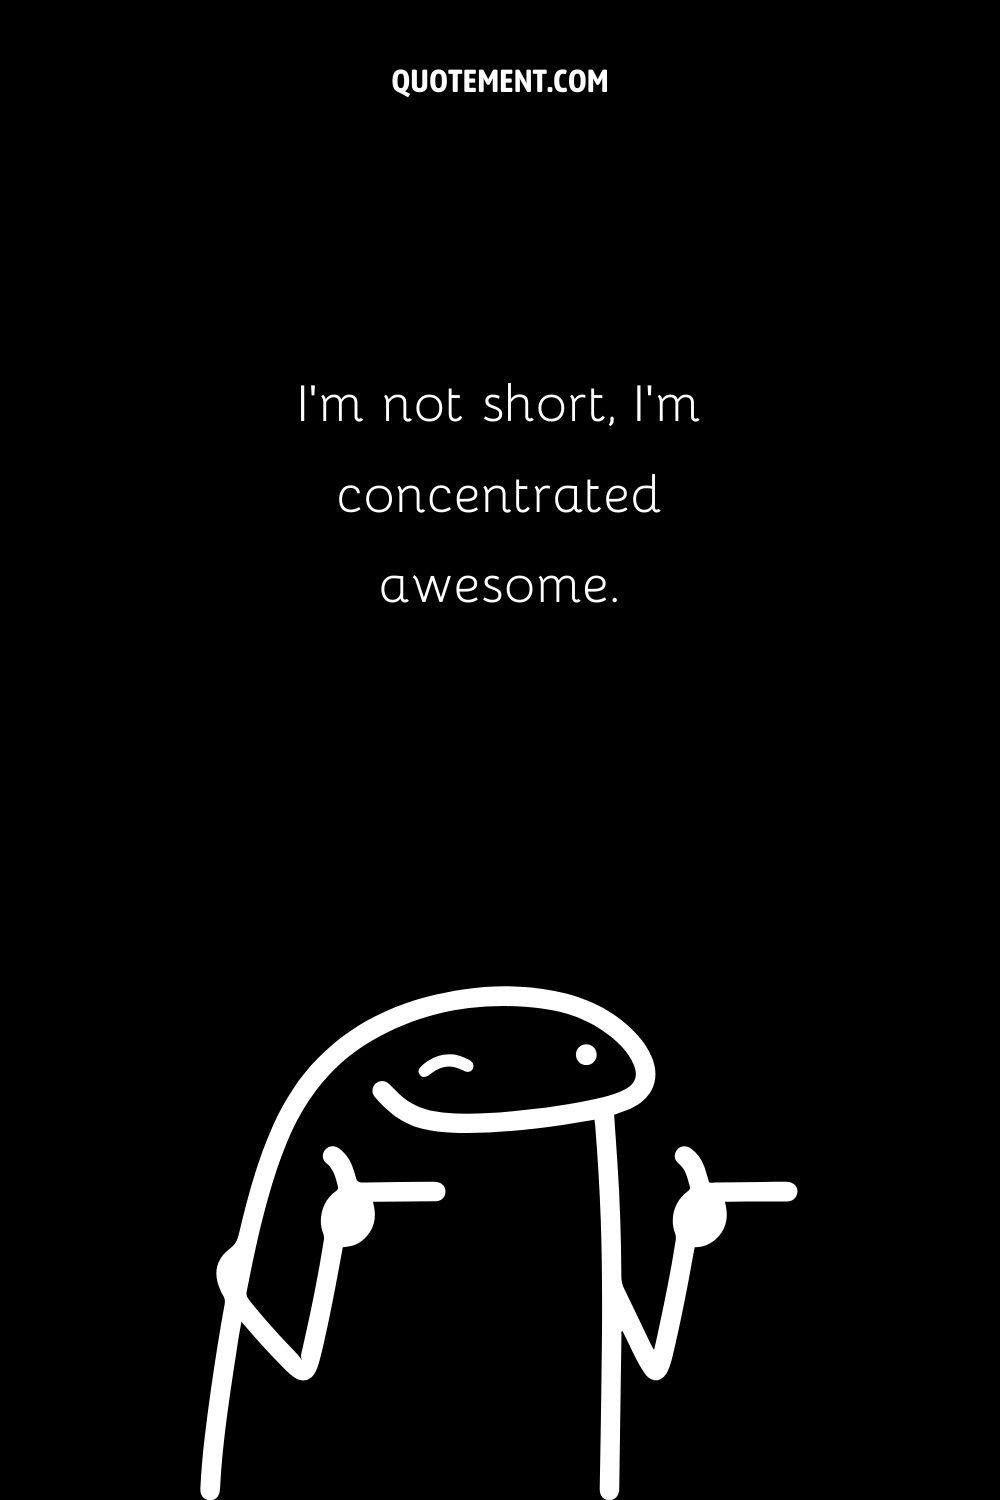 I’m not short, I’m concentrated awesome.